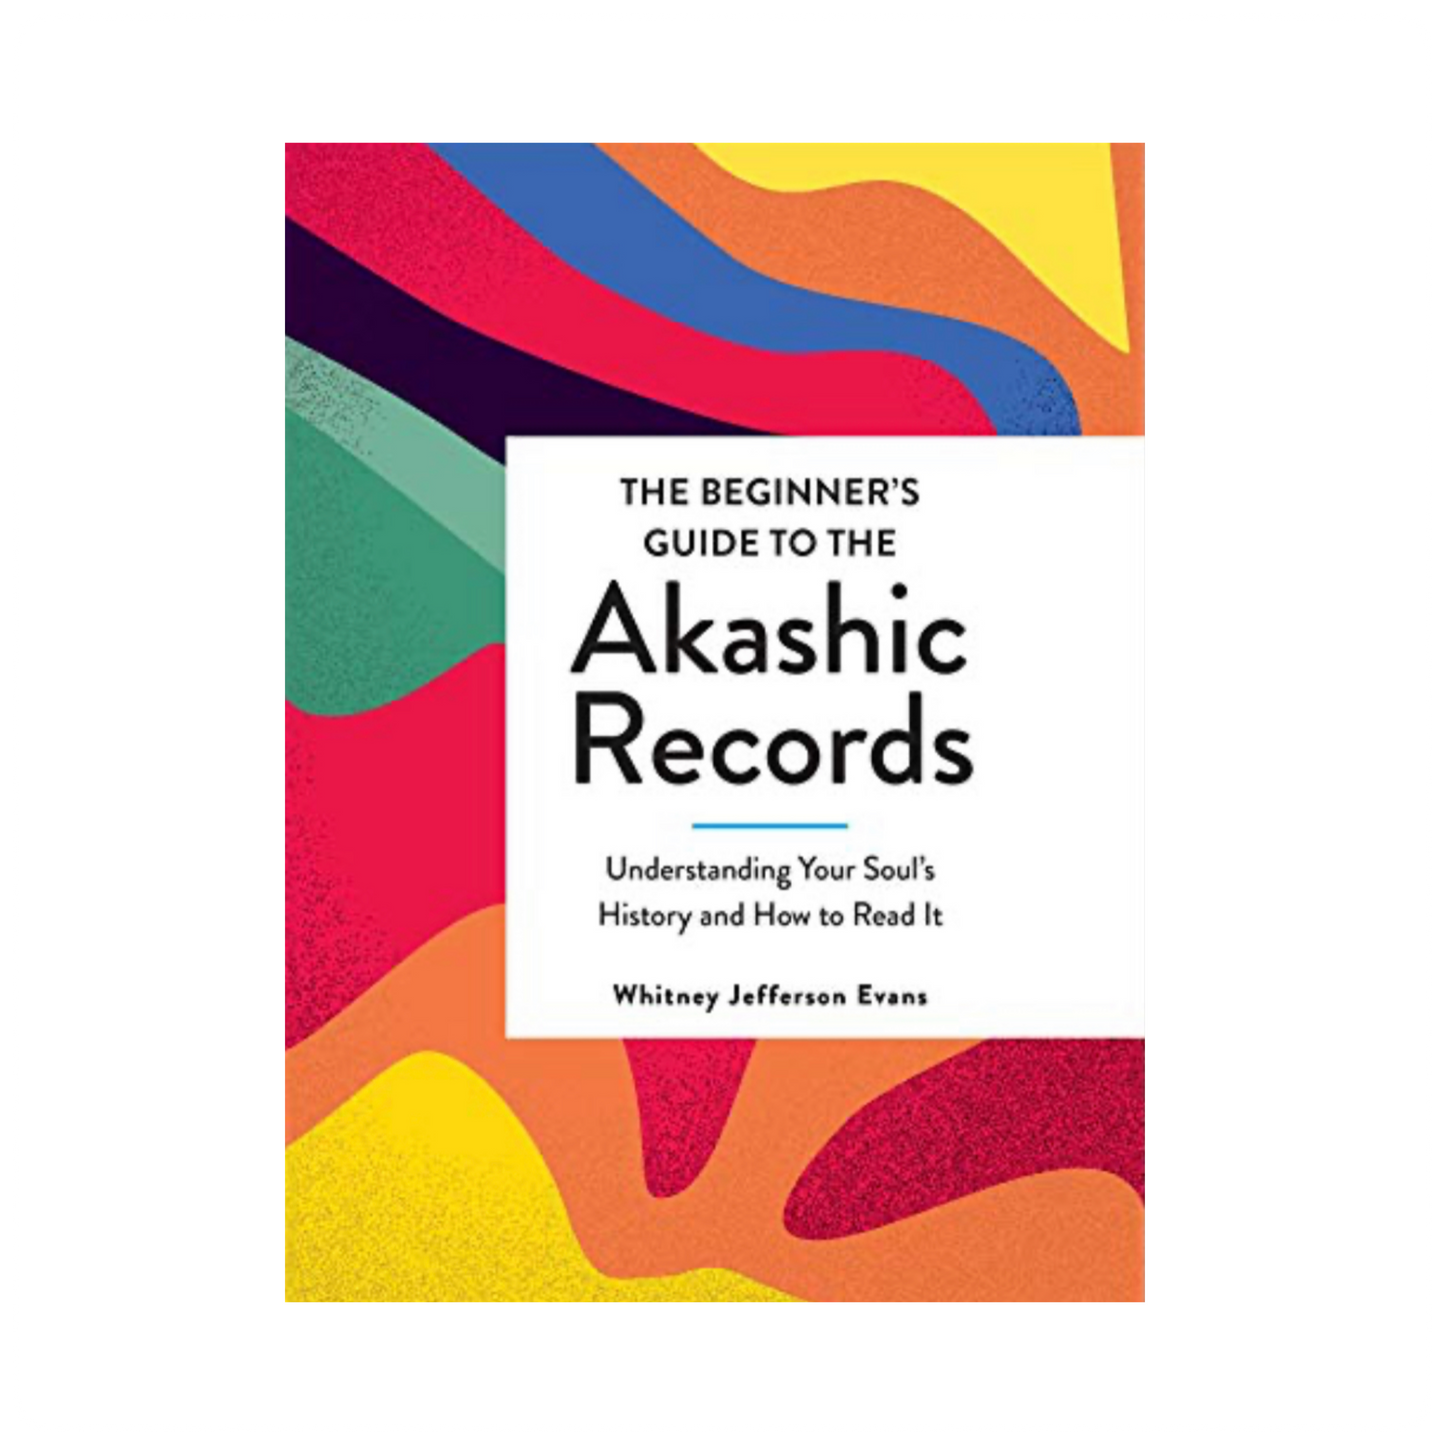 The Beginner’s Guide To The Akashic Records